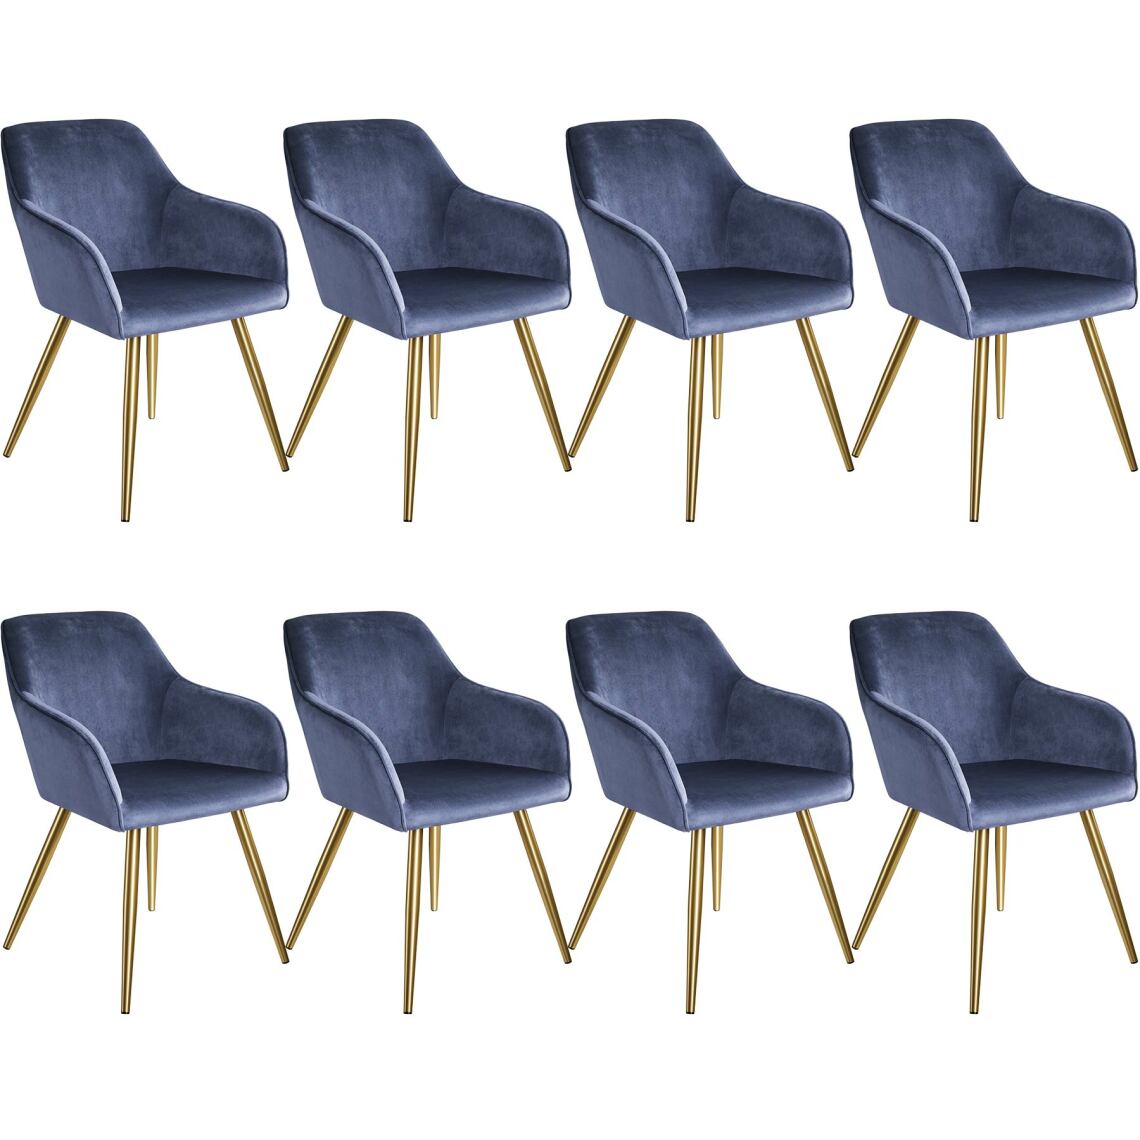 Tectake - 8 Chaises MARILYN Effet Velours Style Scandinave - bleu/or - Chaises